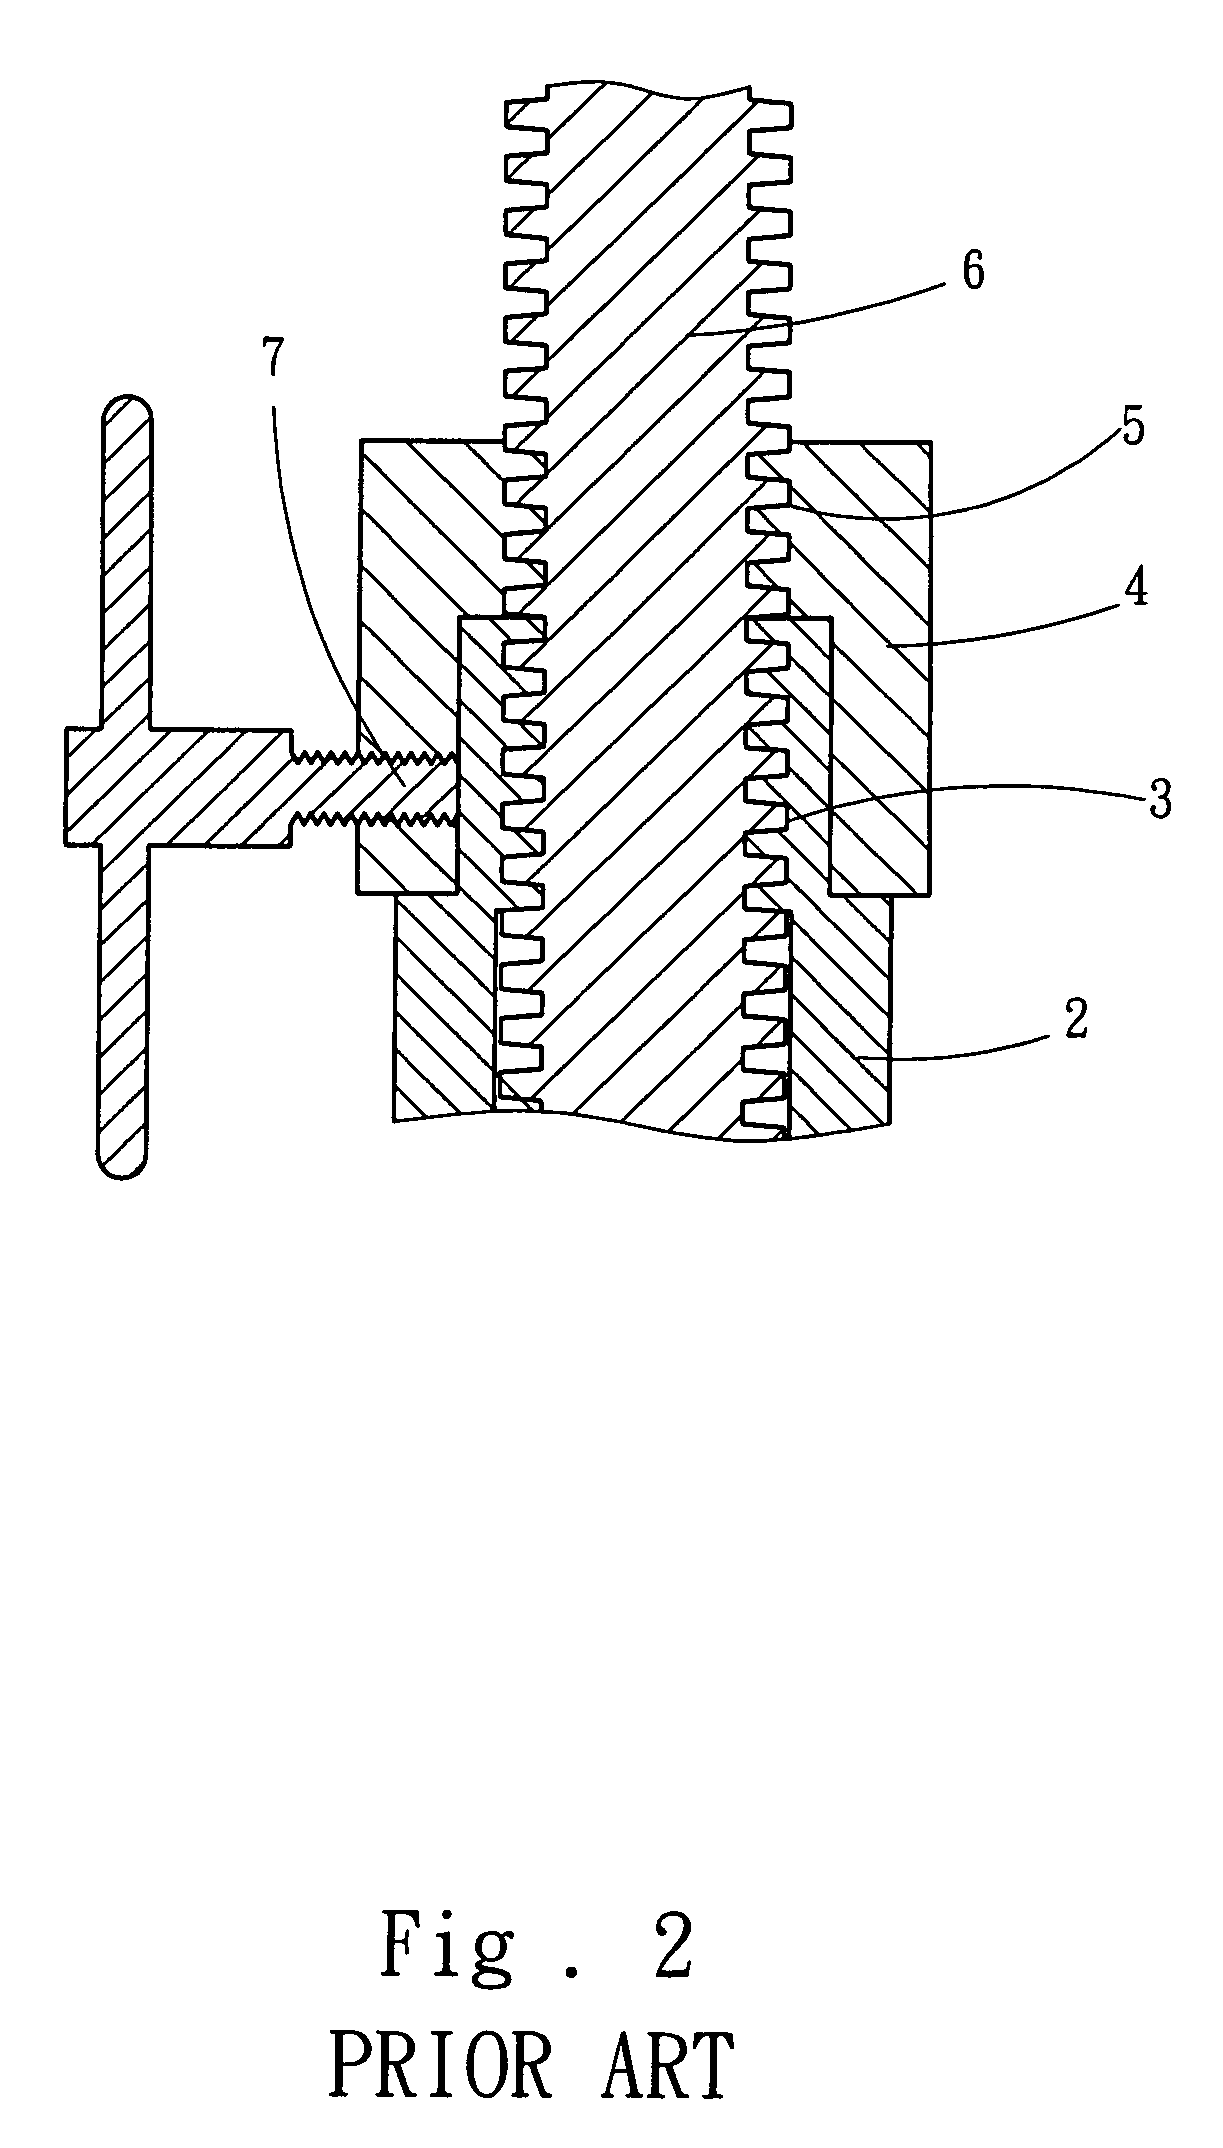 Anchoring fixture for stools capable of adjusting elevation